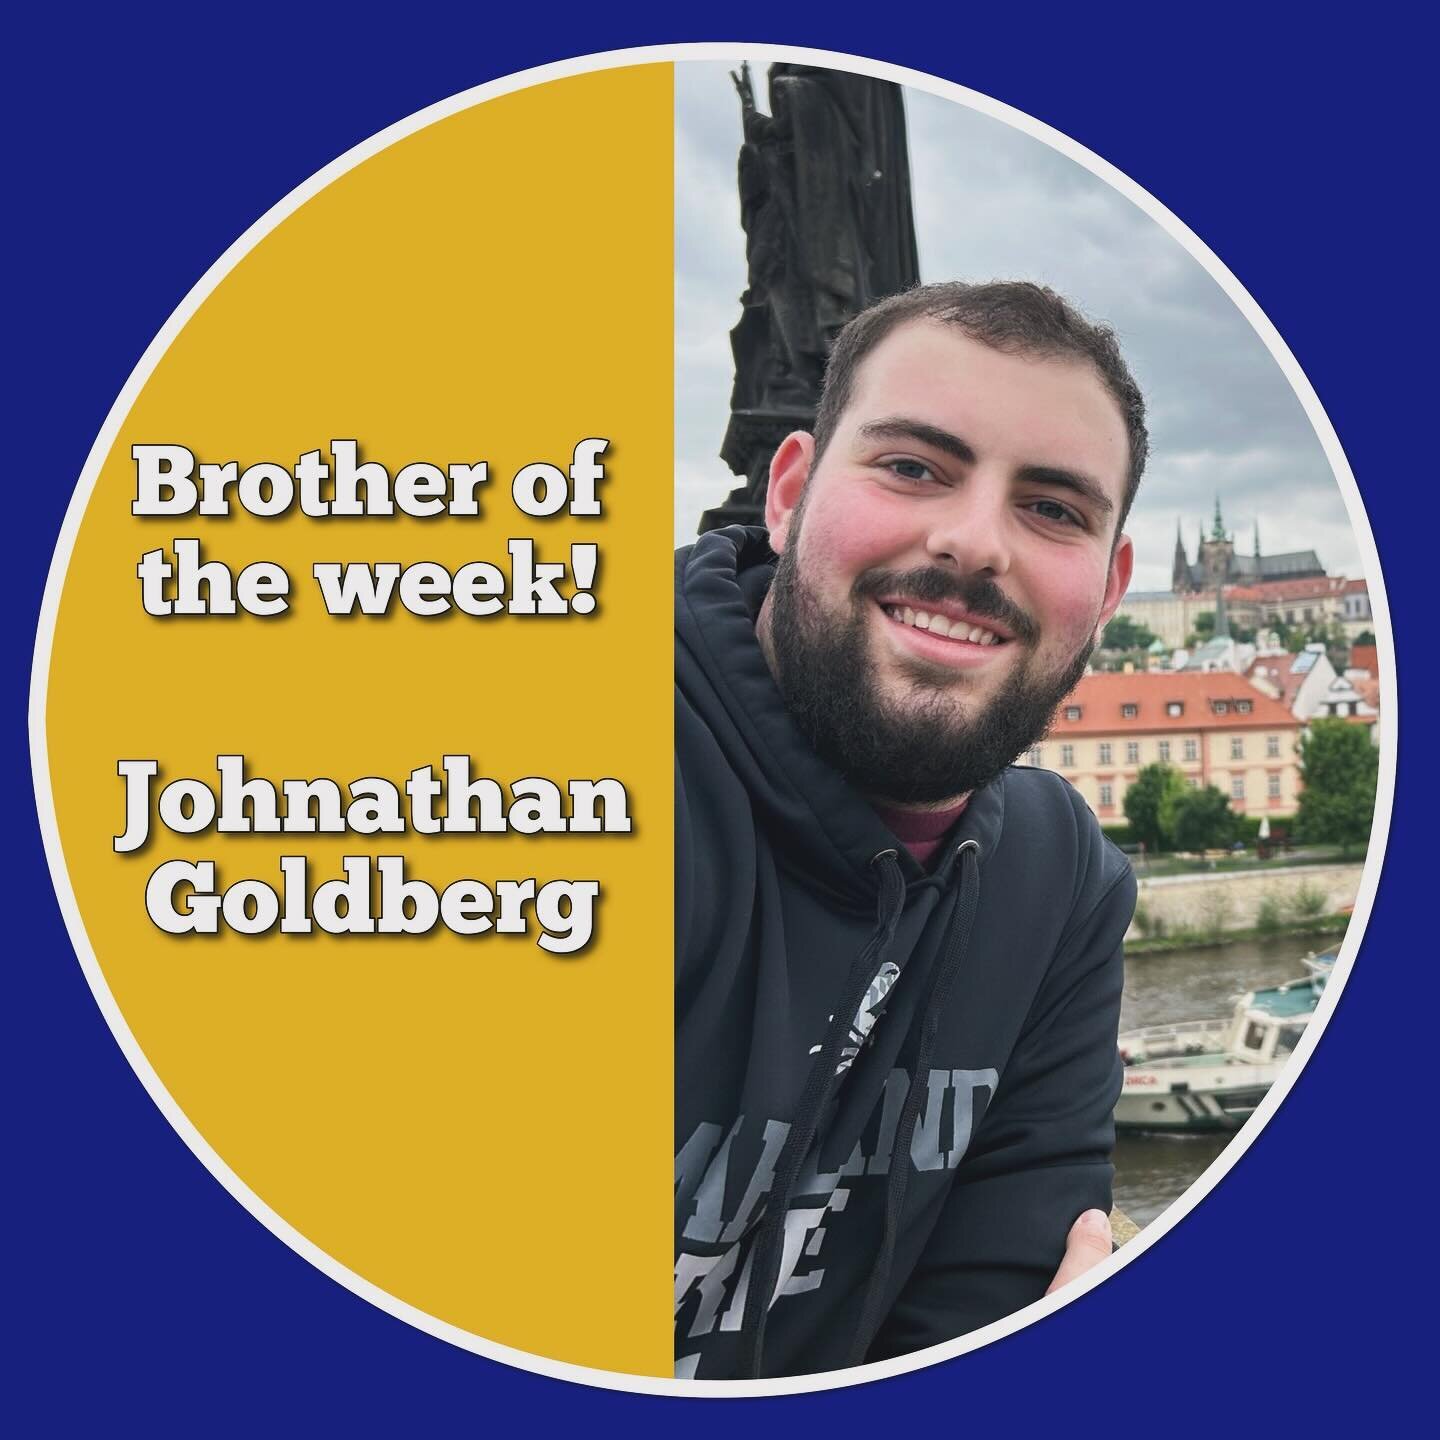 Our brother of the week is Johnathan Goldberg! With senior send offs taking place, this week we dedicate a reflection to a brother who has greatly strengthened the dynamic of this chapter. The rightful King of the porch, your friends we are proud to 